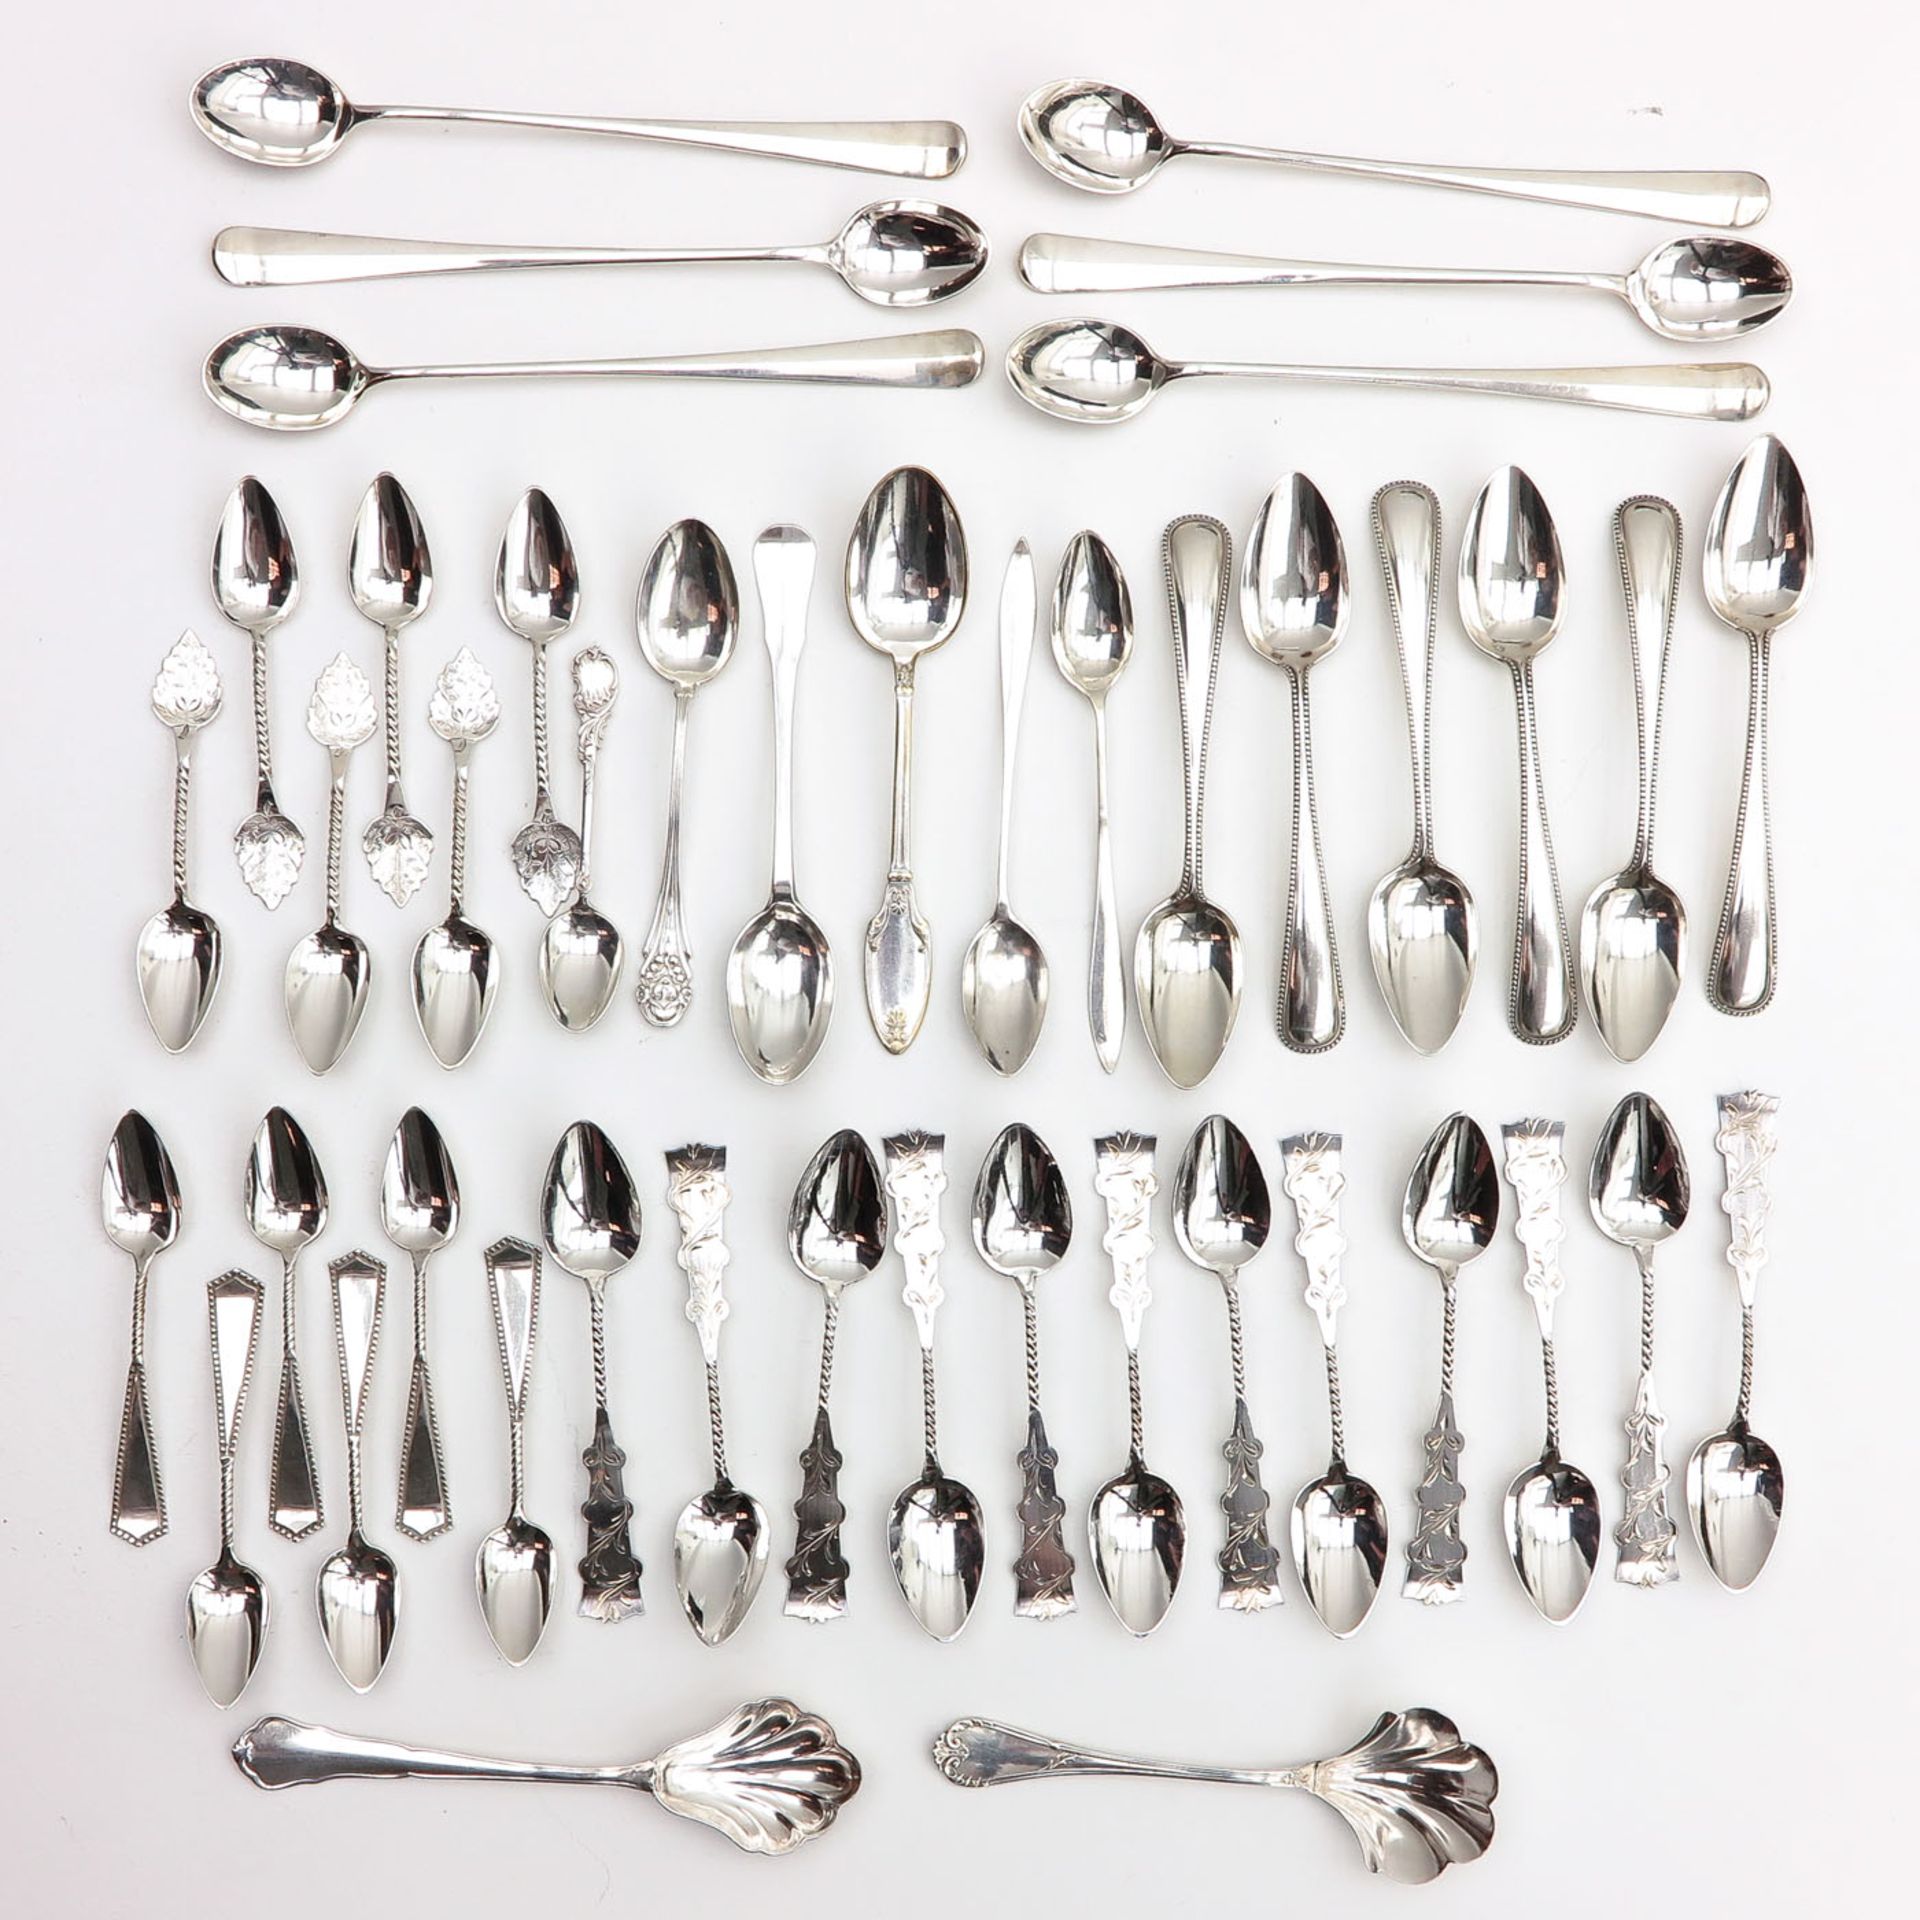 A Lot of Silver Spoons